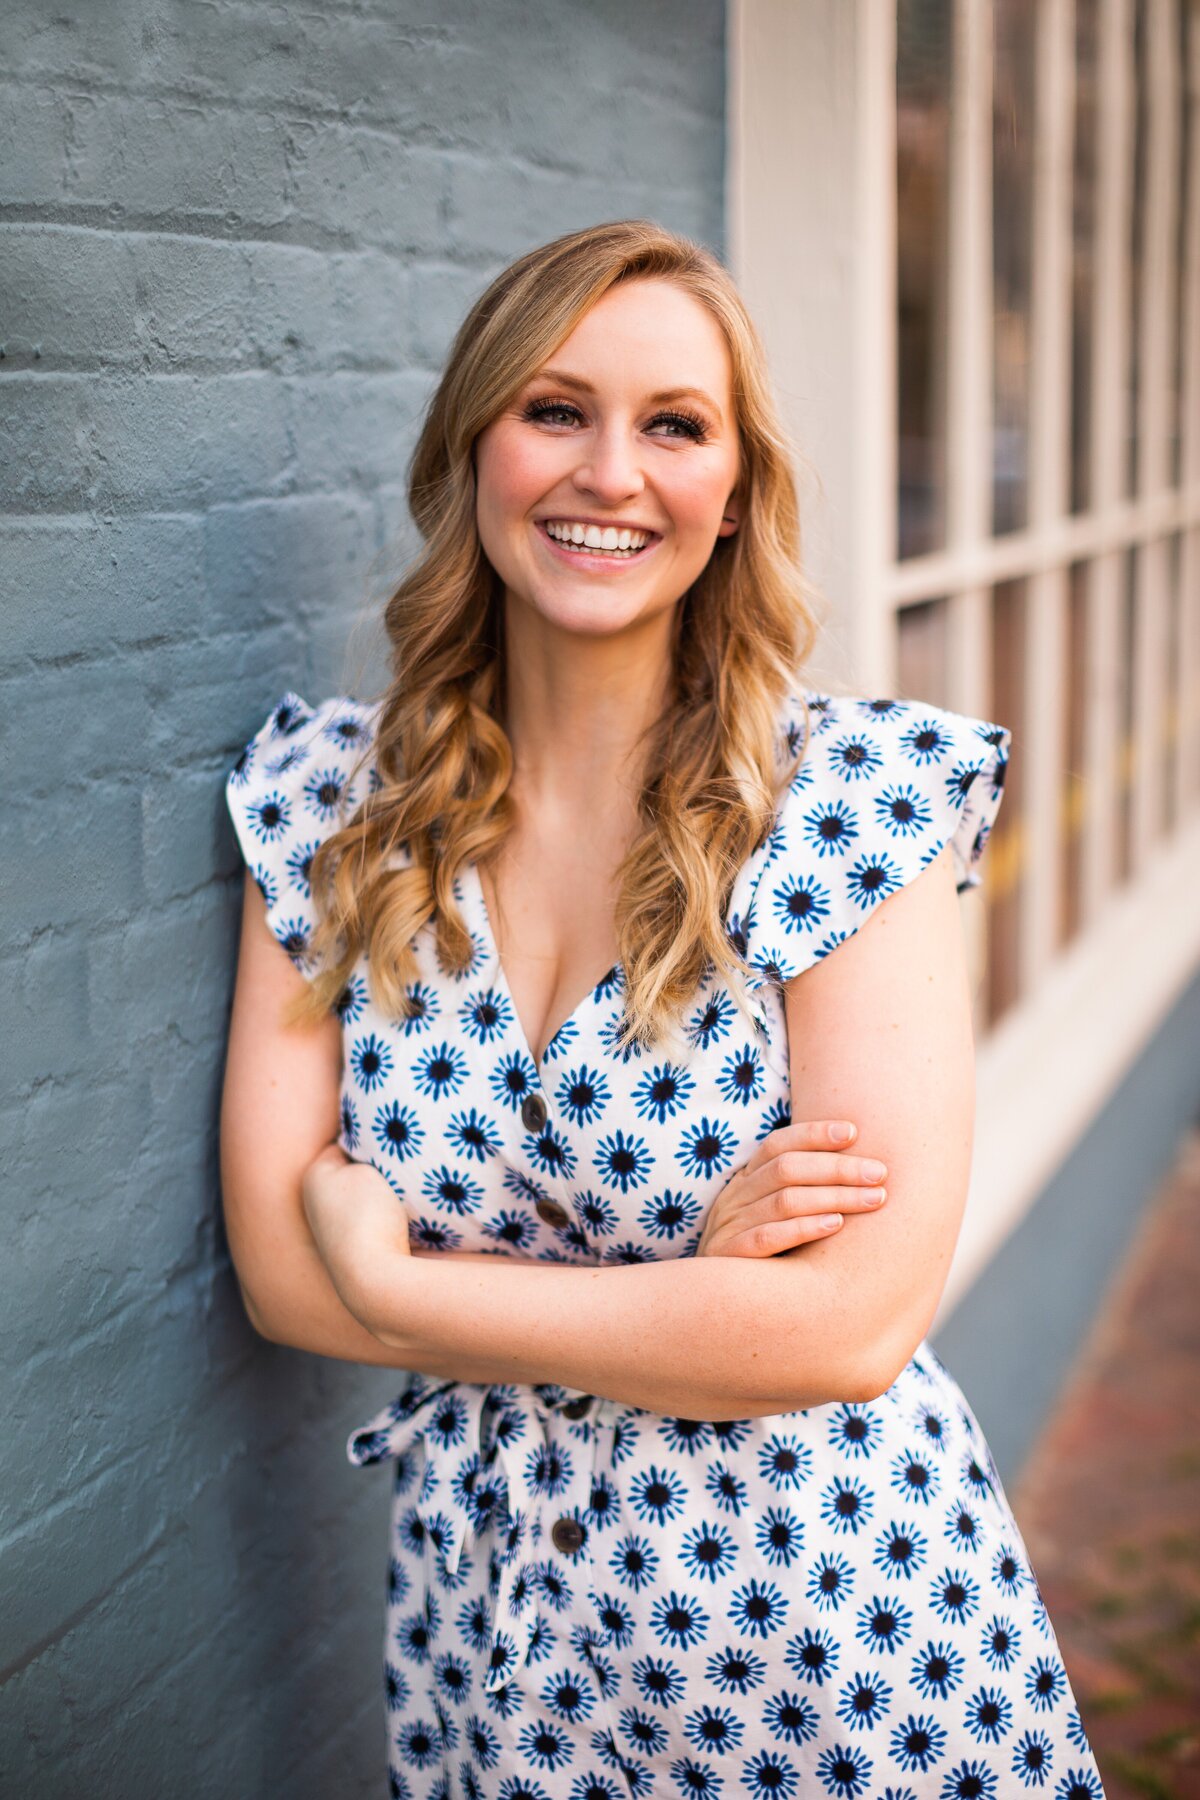 A woman with blonde curled hair wears a floral blue and white wrap dress while standing in front of a blue brick wall